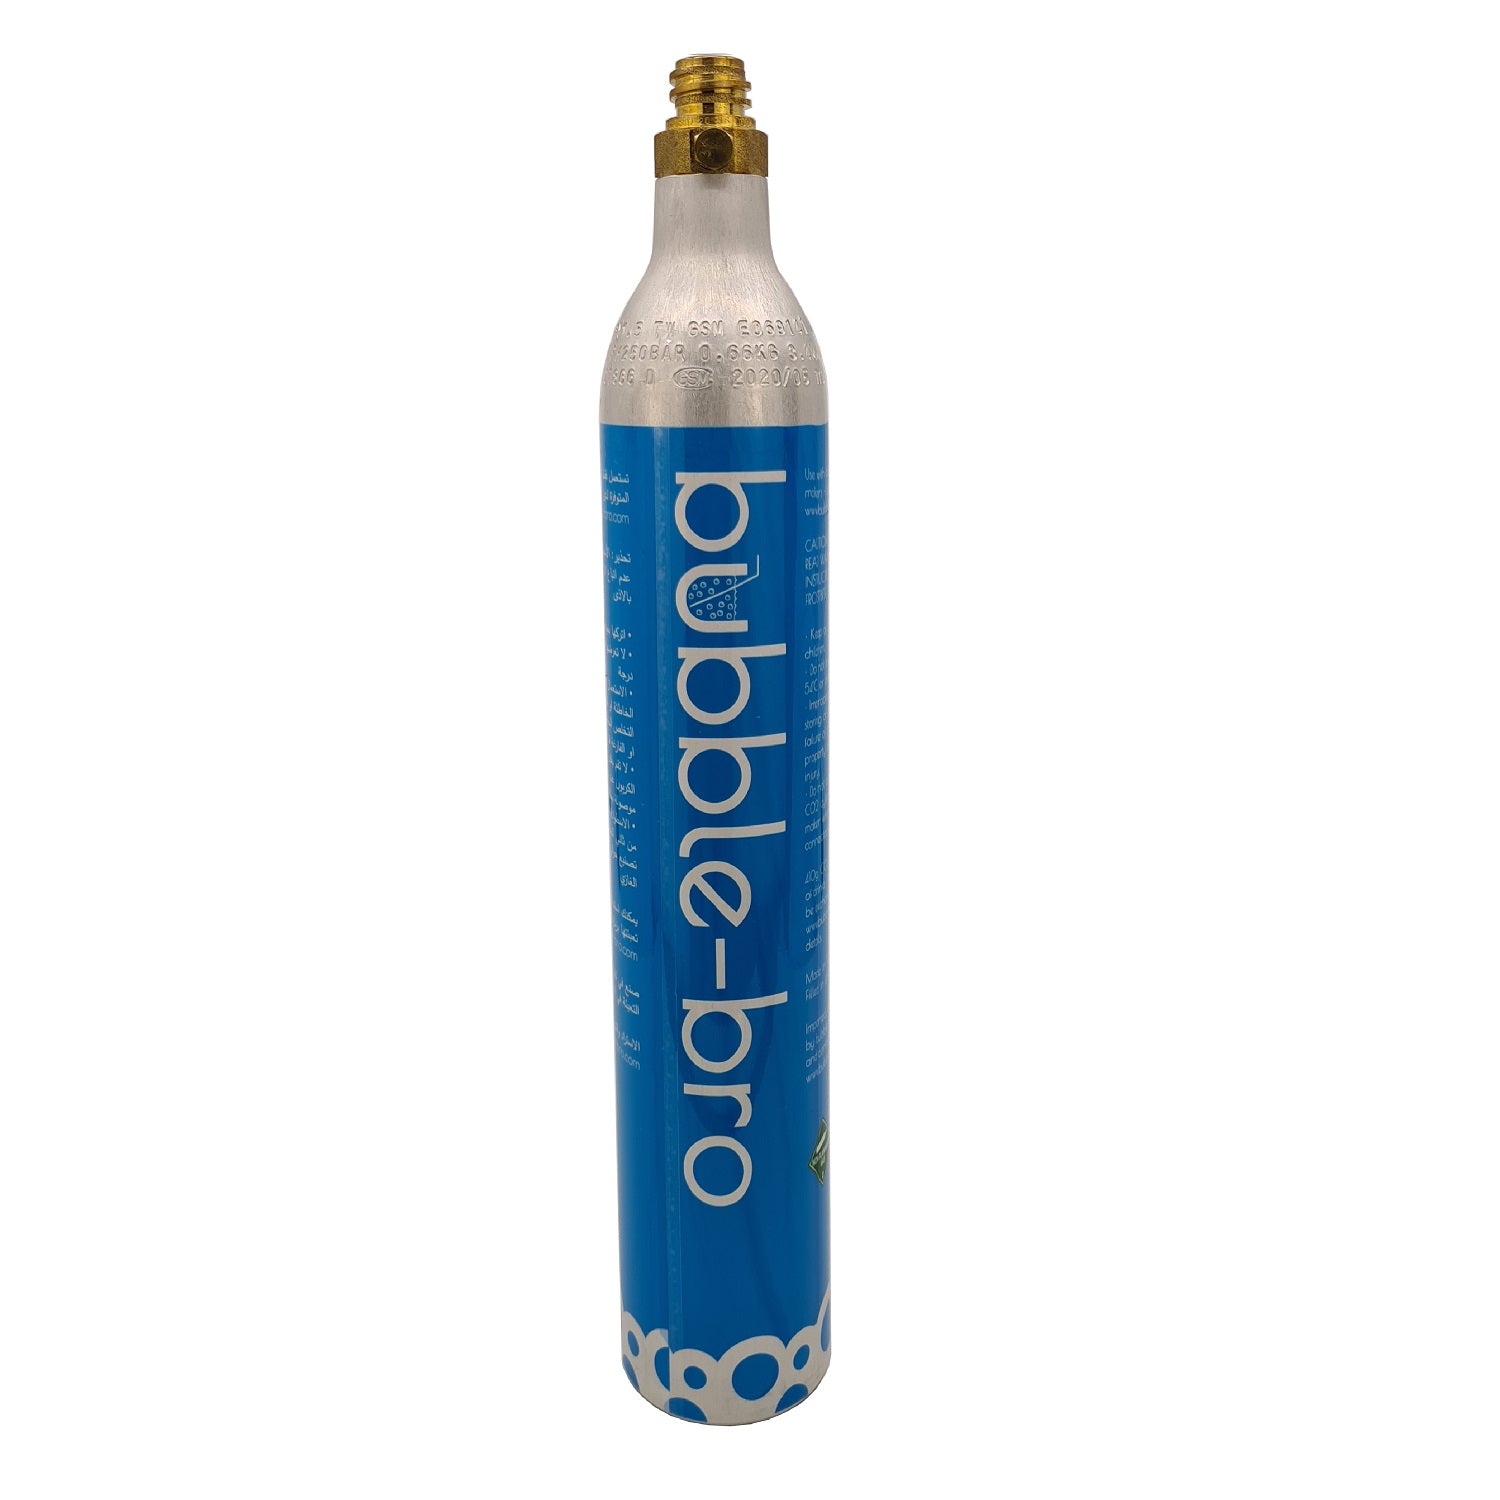 BUBBLE-BRO CO2 CYLINDER